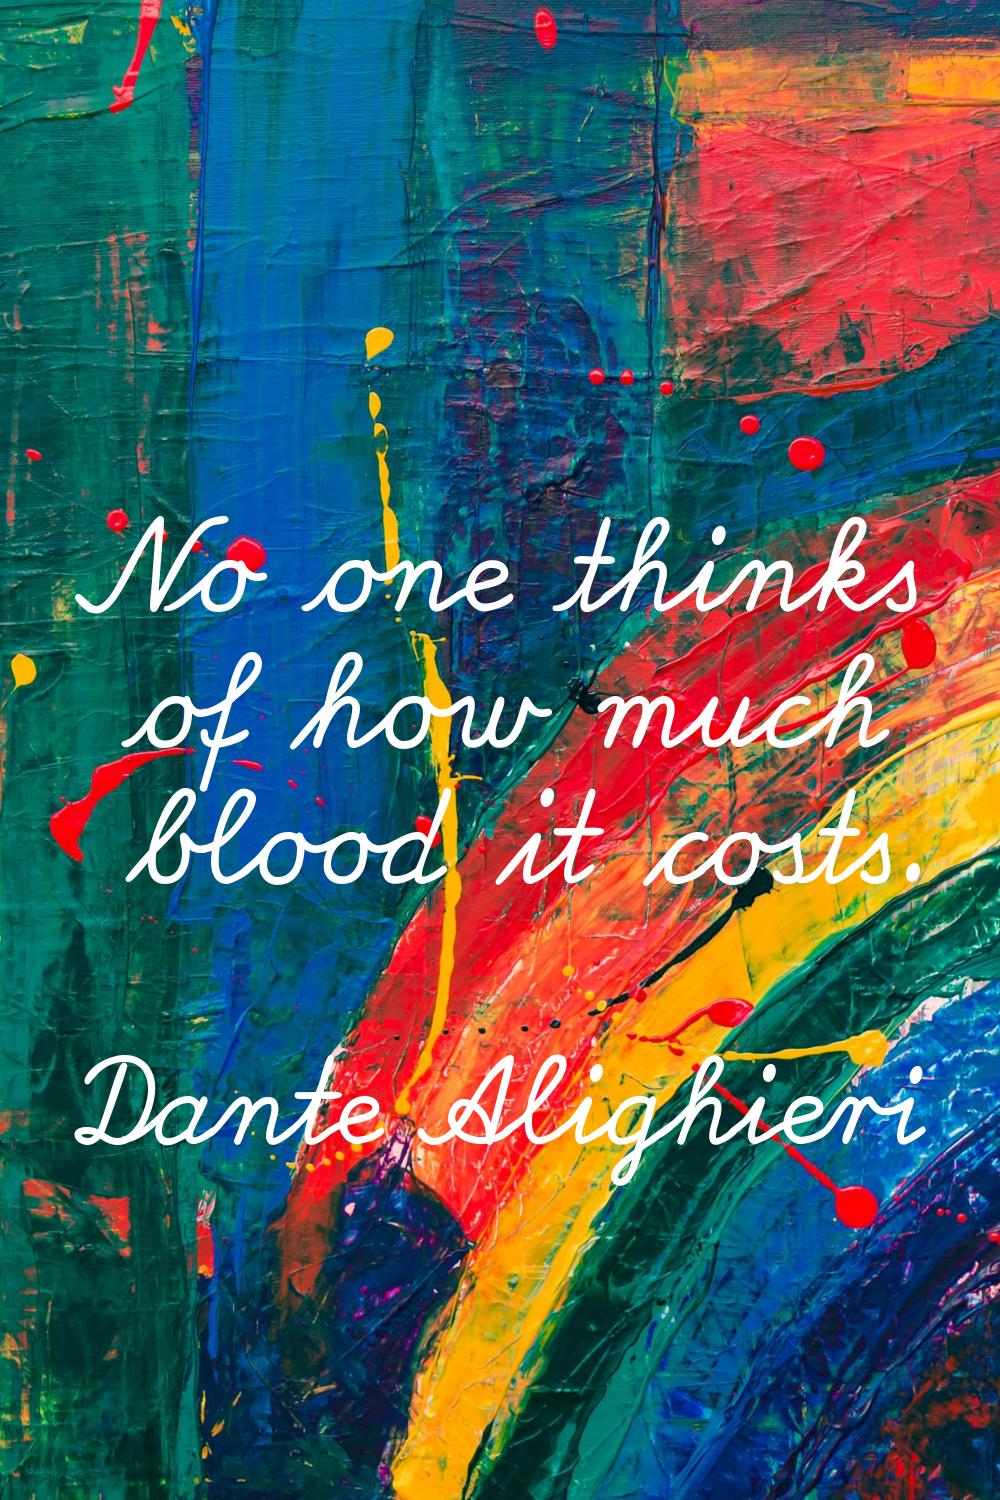 No one thinks of how much blood it costs.